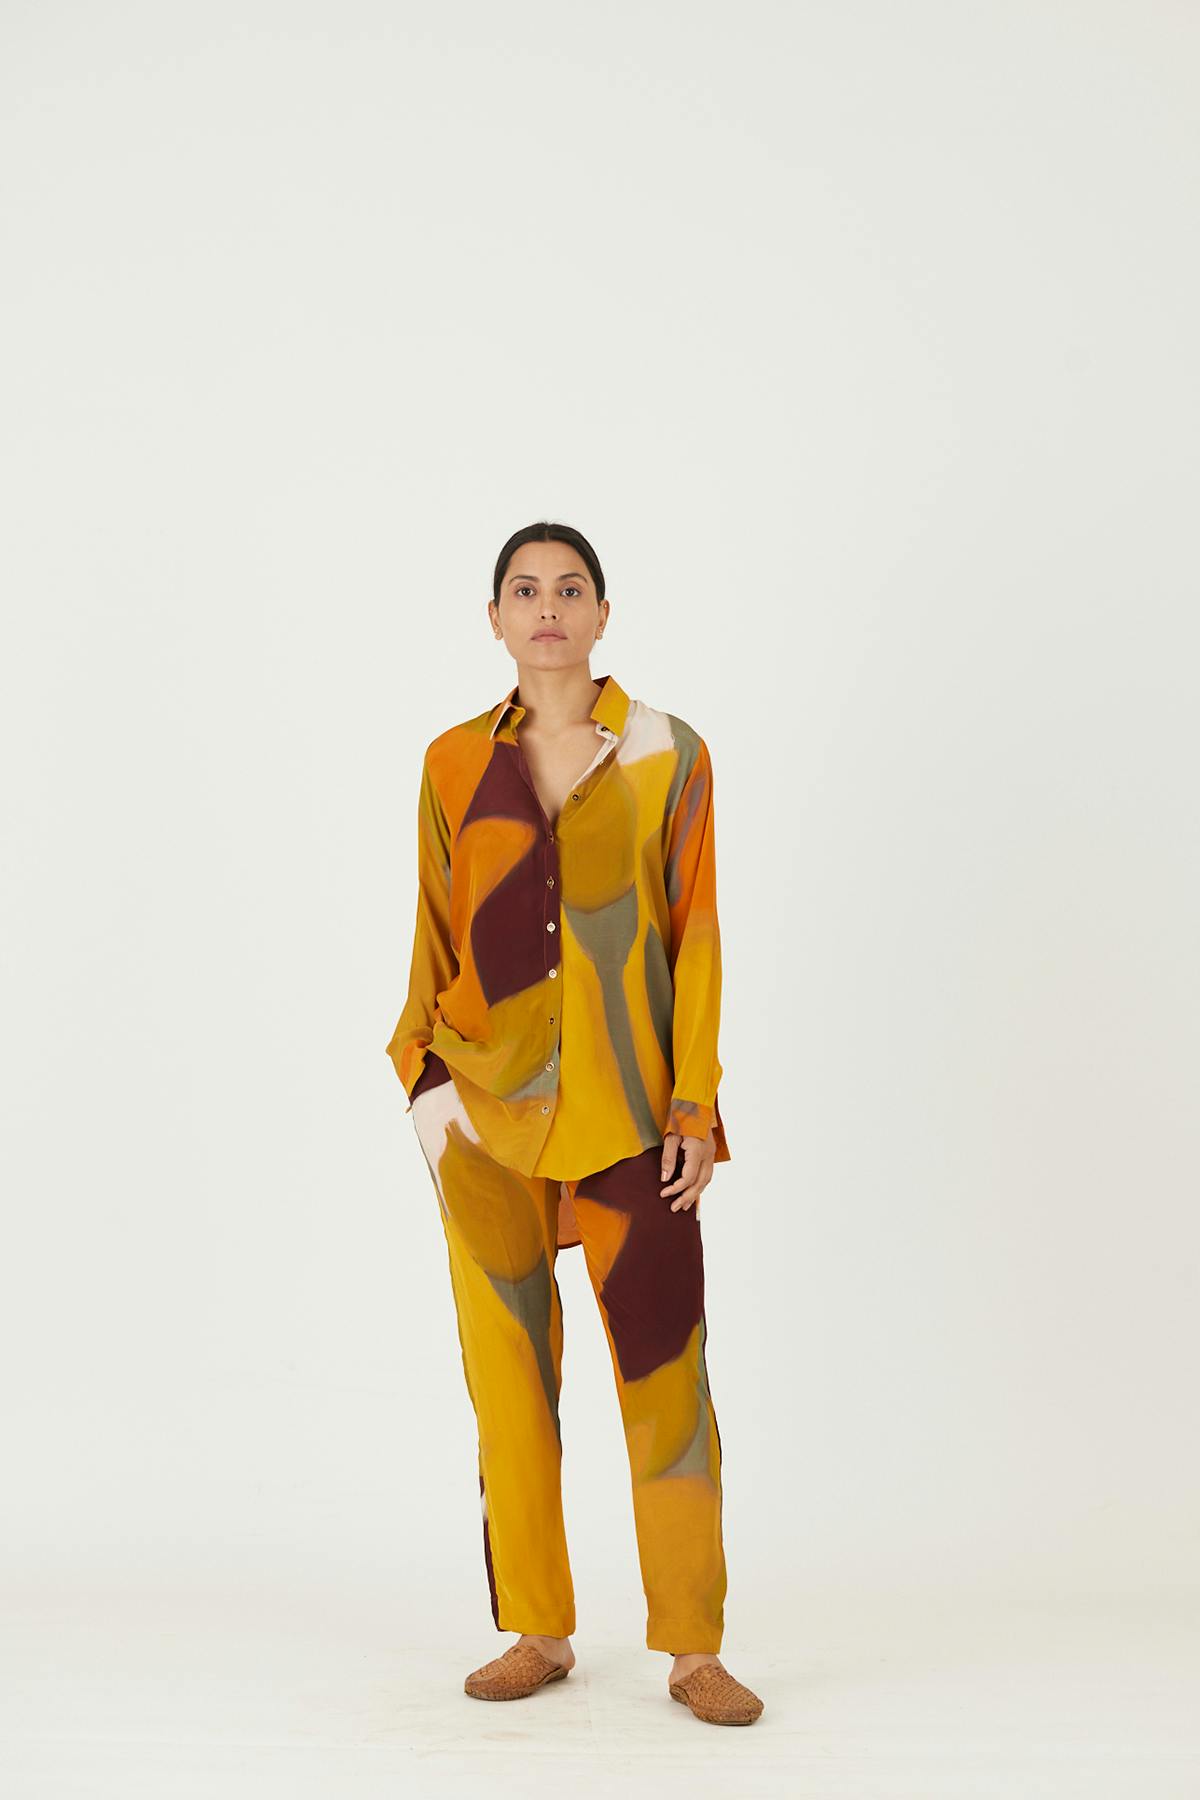 Primary image of LEI LANI YELLOW CO-ORD, a product by Yam India